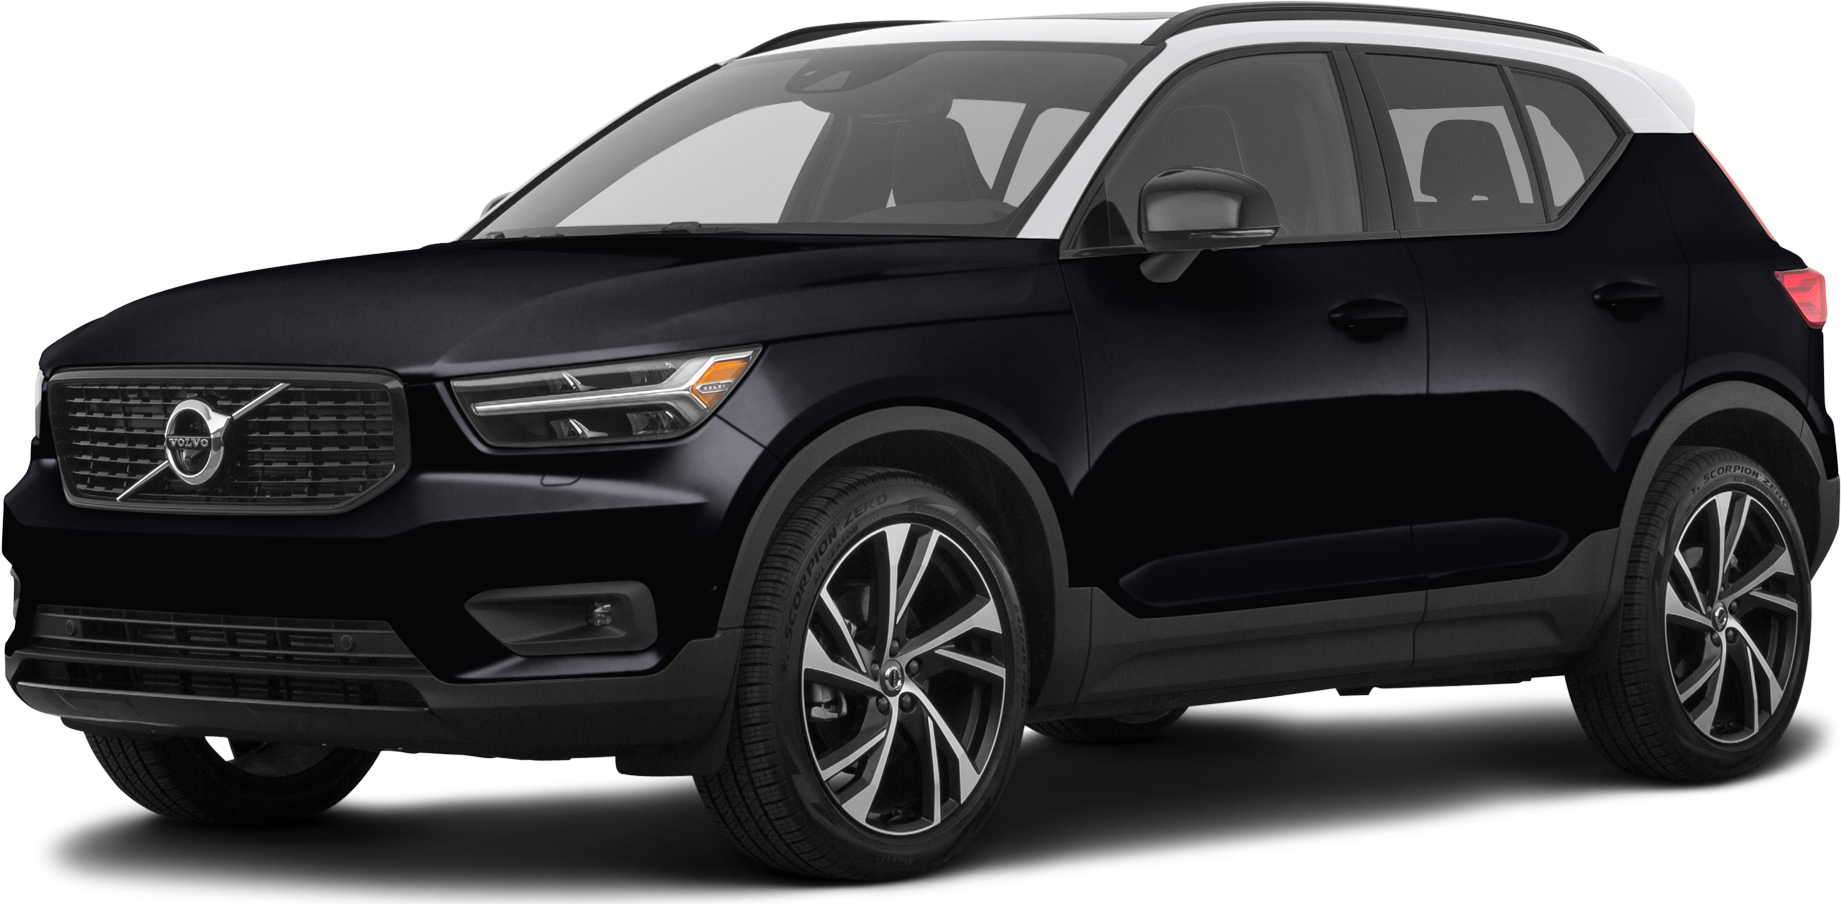 2020 Volvo XC40 Price, Value, Ratings & Reviews